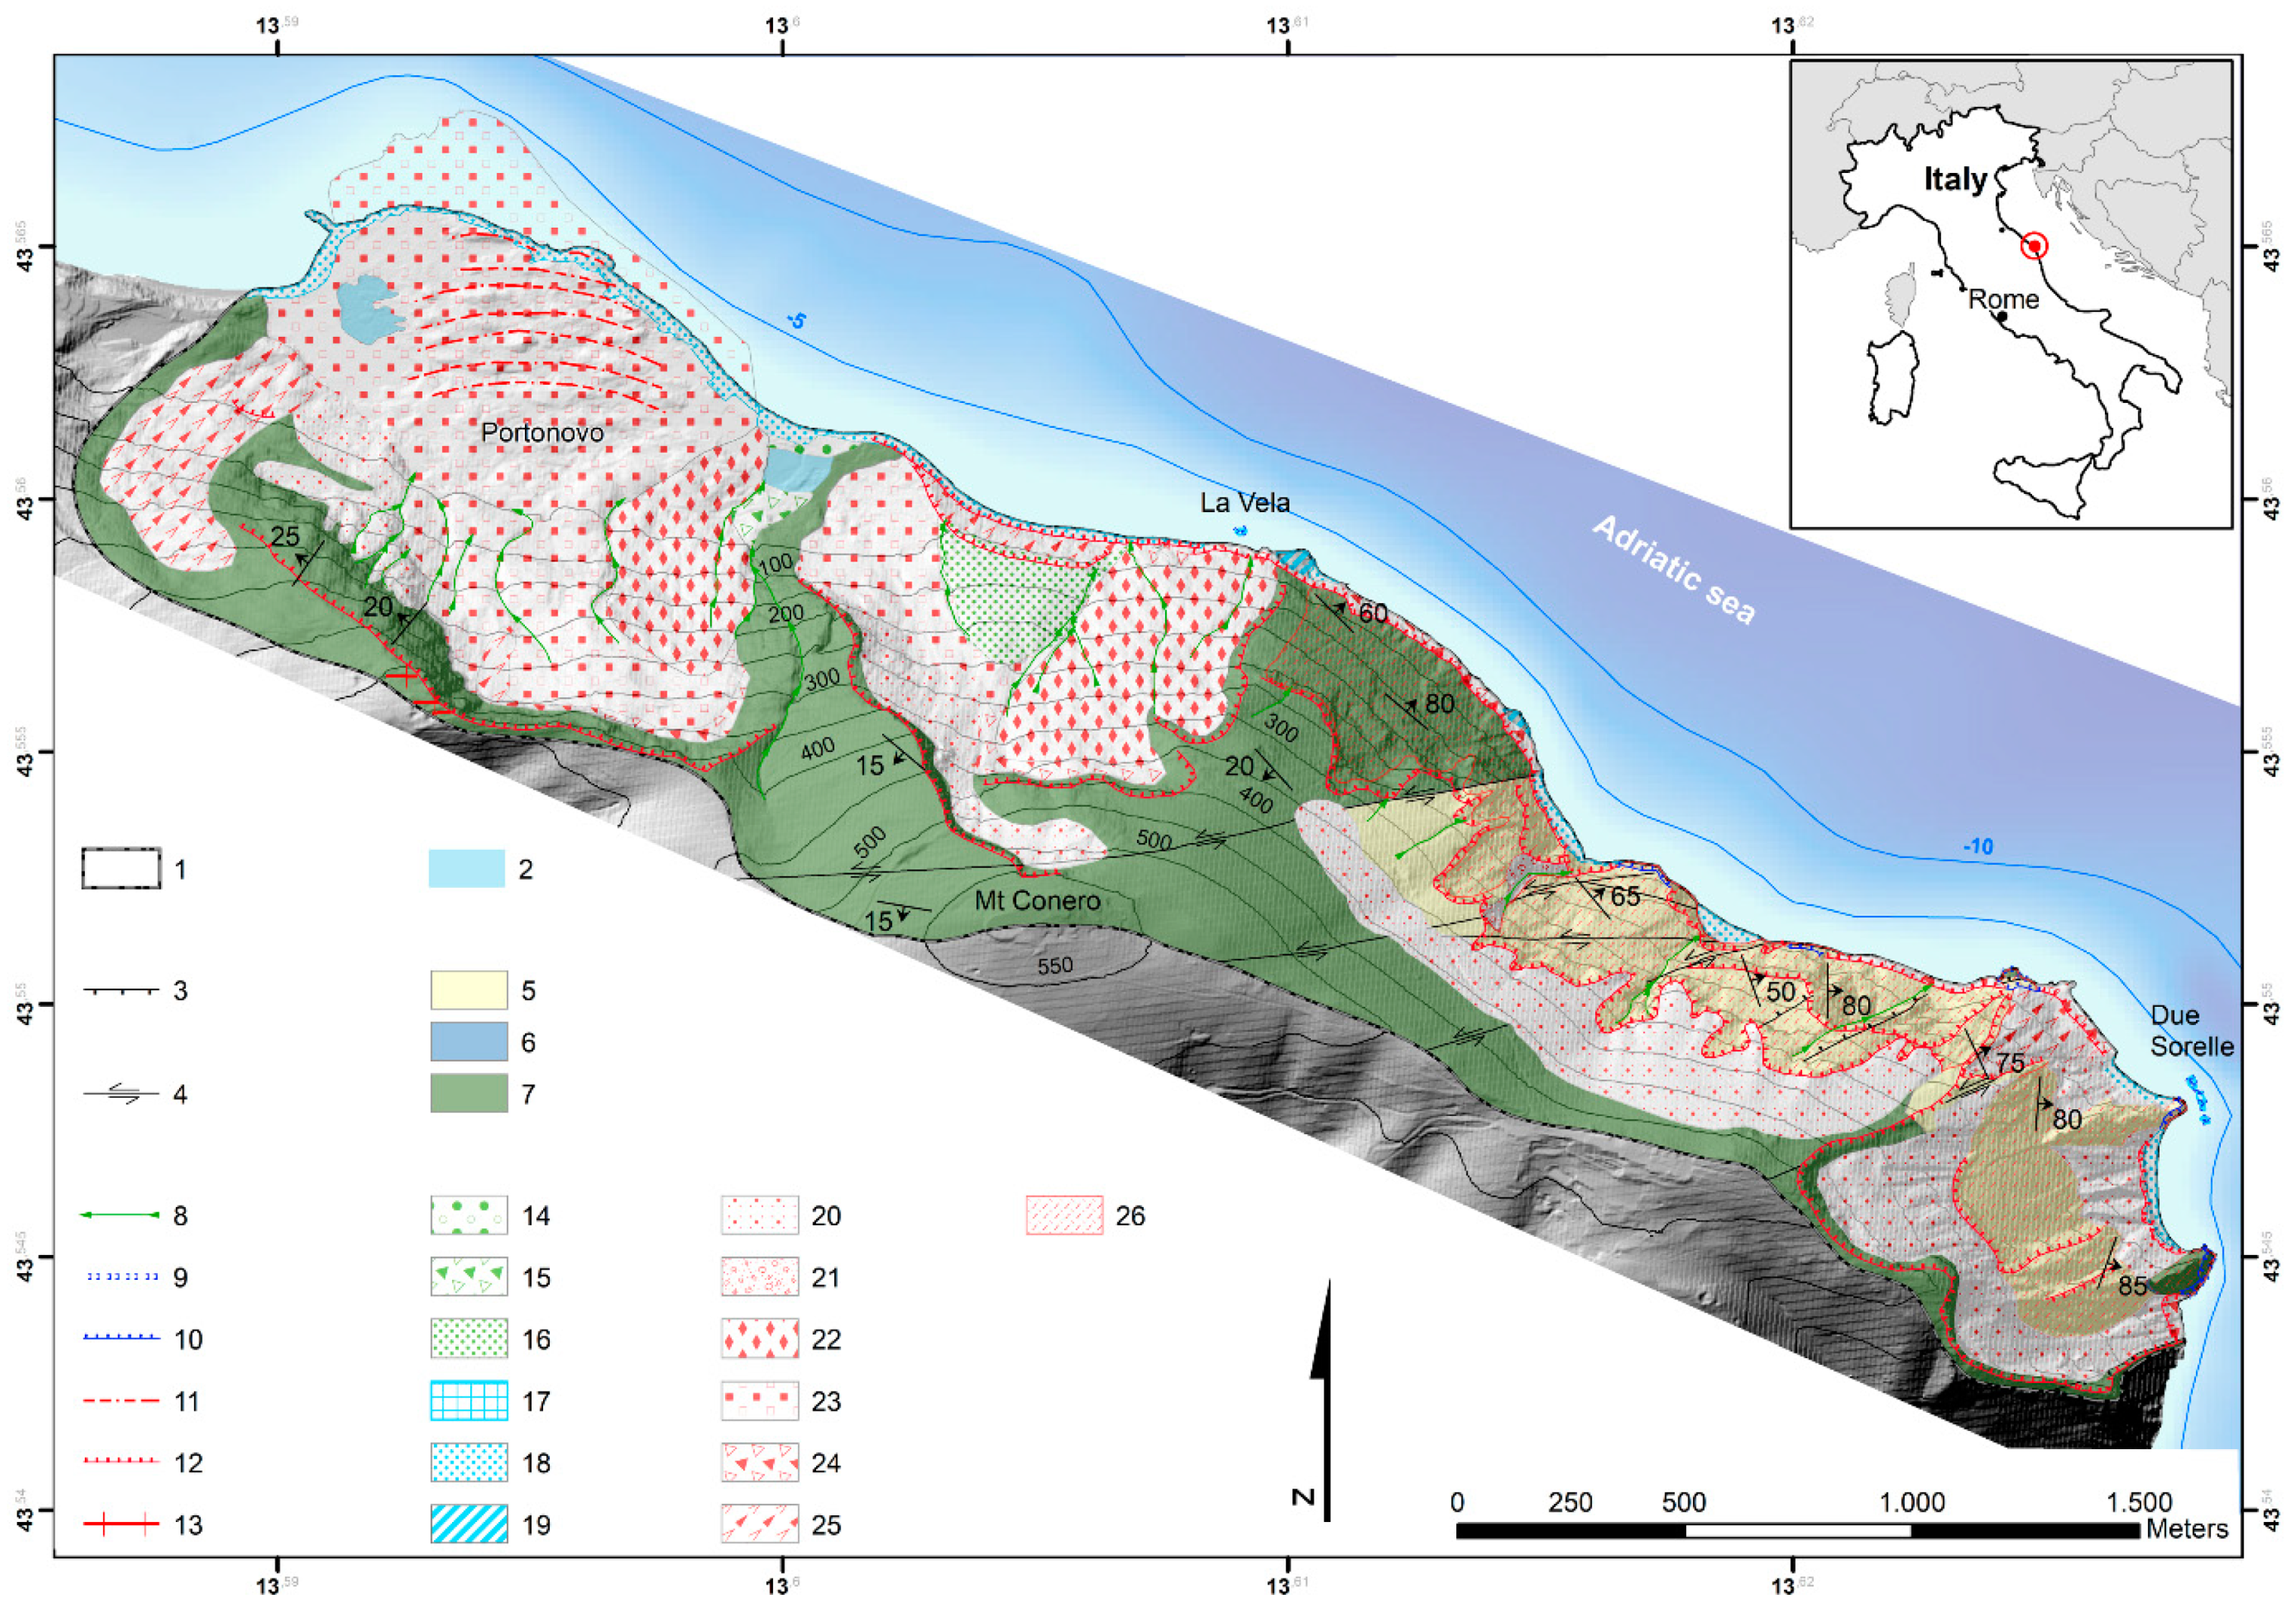 Applied Sciences | Free Full-Text | Integrated Field Surveying and Land  Surface Quantitative Analysis to Assess Landslide Proneness in the Conero  Promontory Rocky Coast (Italy) | HTML